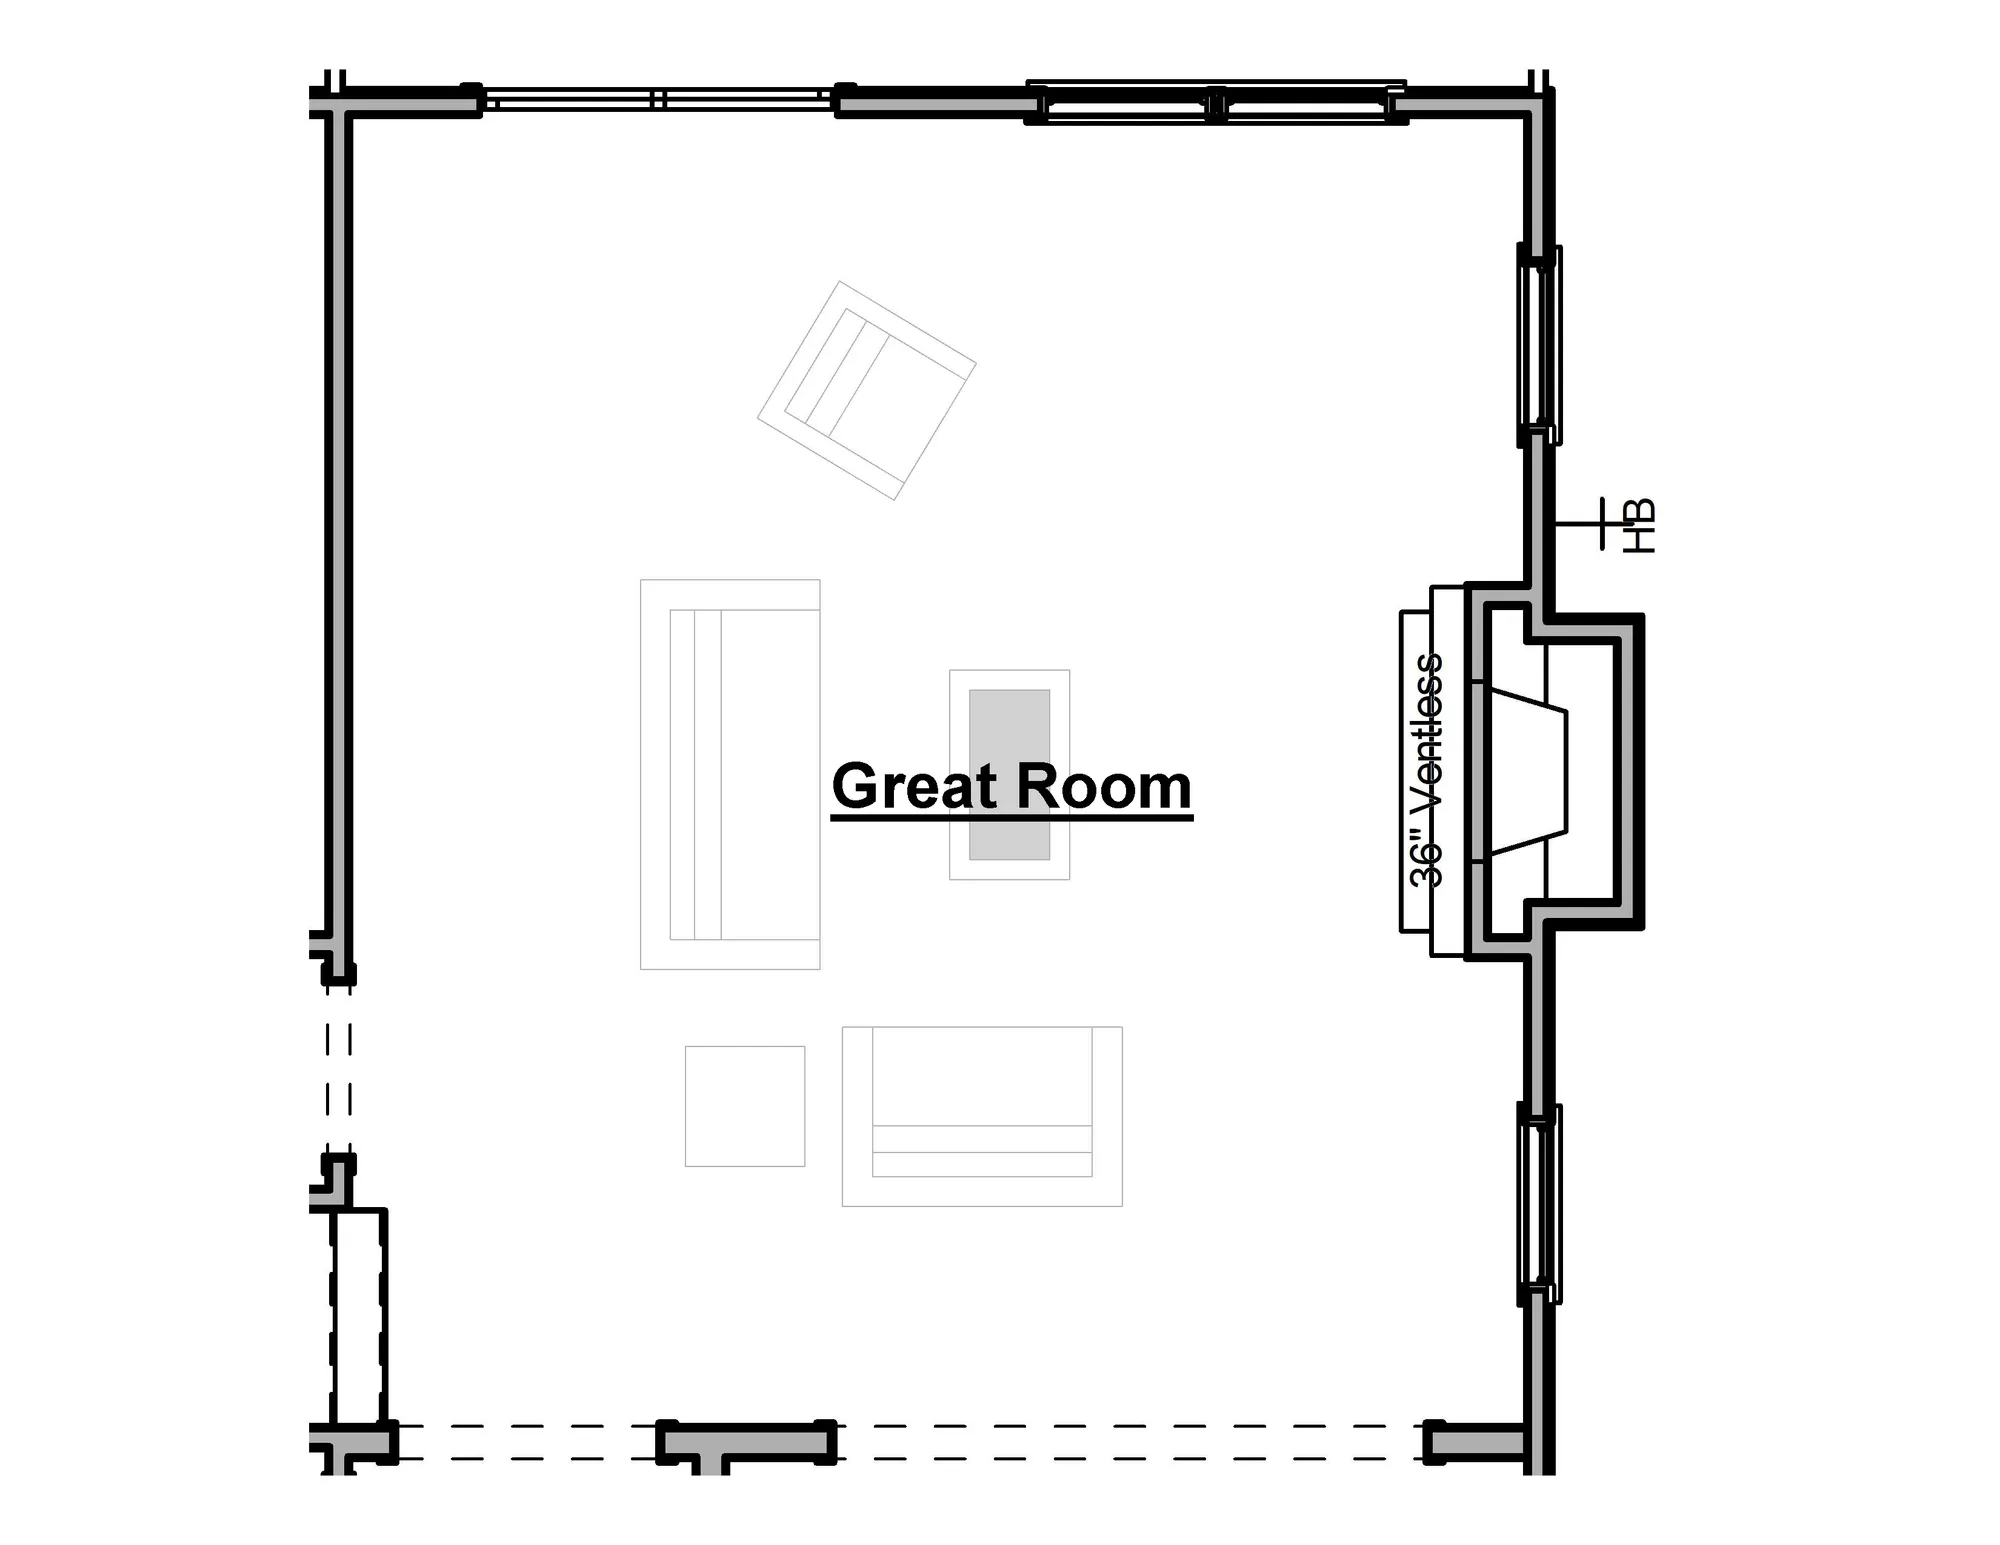 Great Room - Fireplace Bump Out Option - undefined